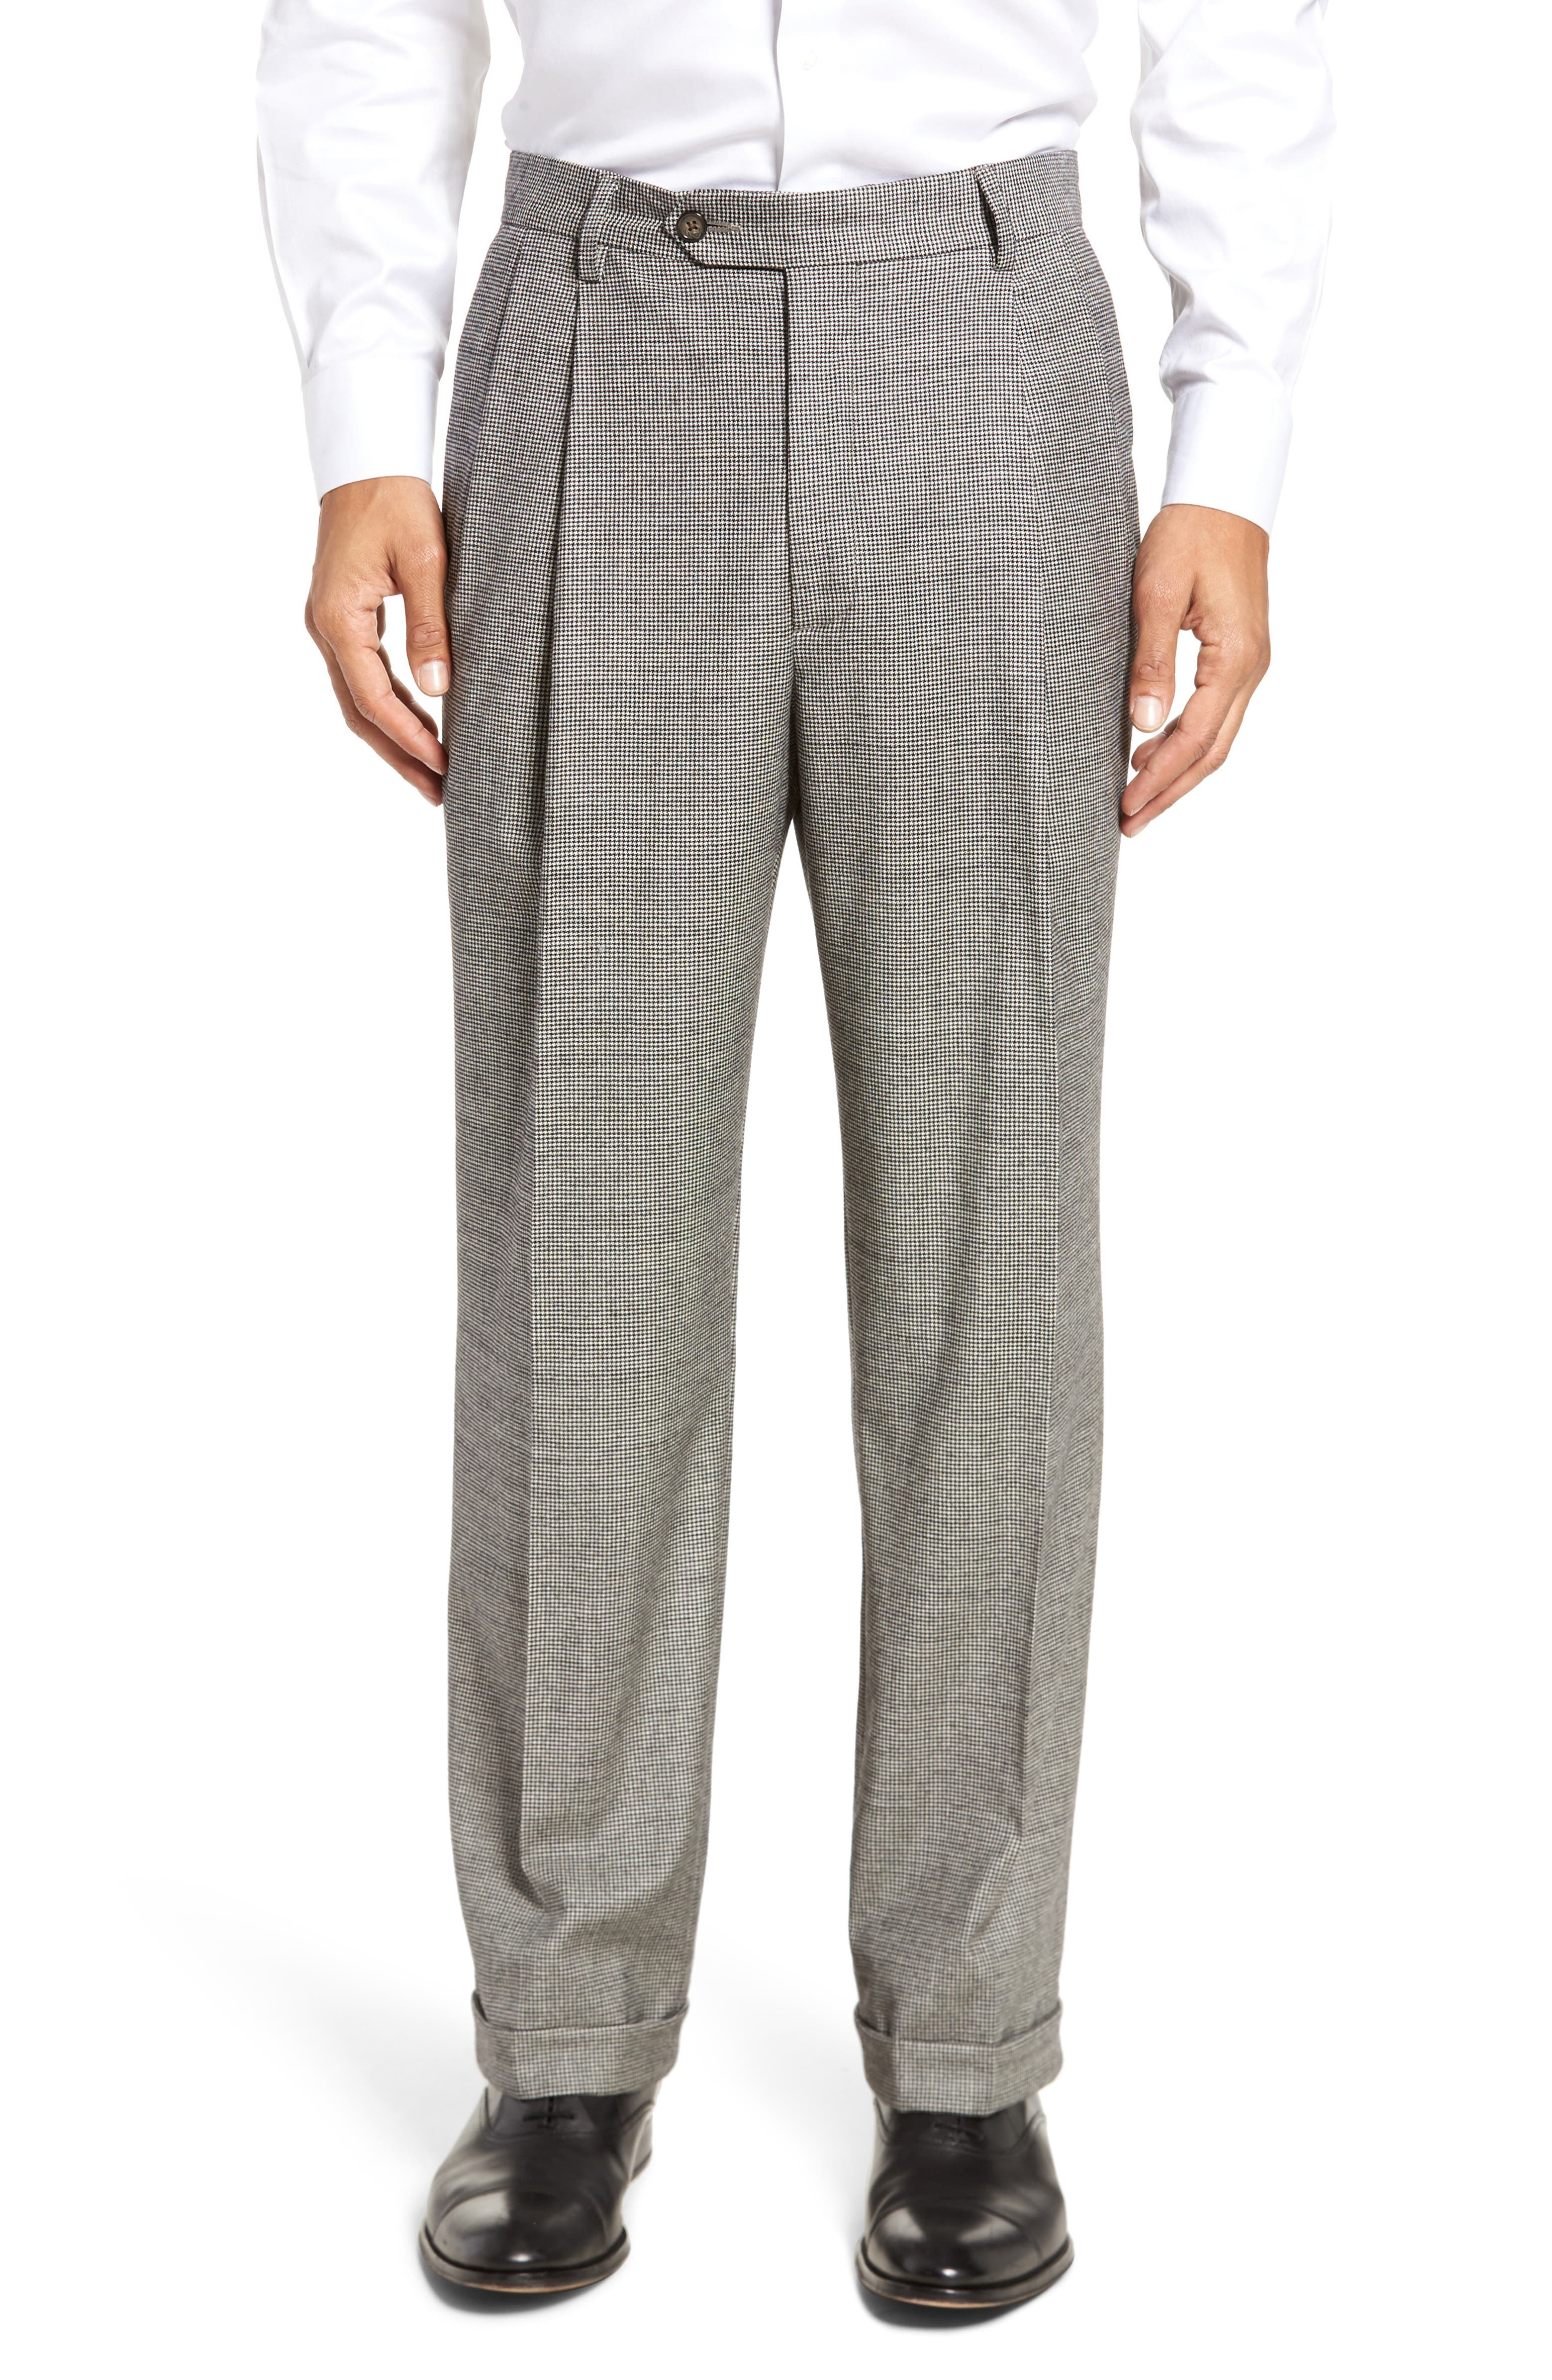 Berle Pleated Classic Fit Stretch Houndstooth Wool Dress Pants Nordstrom